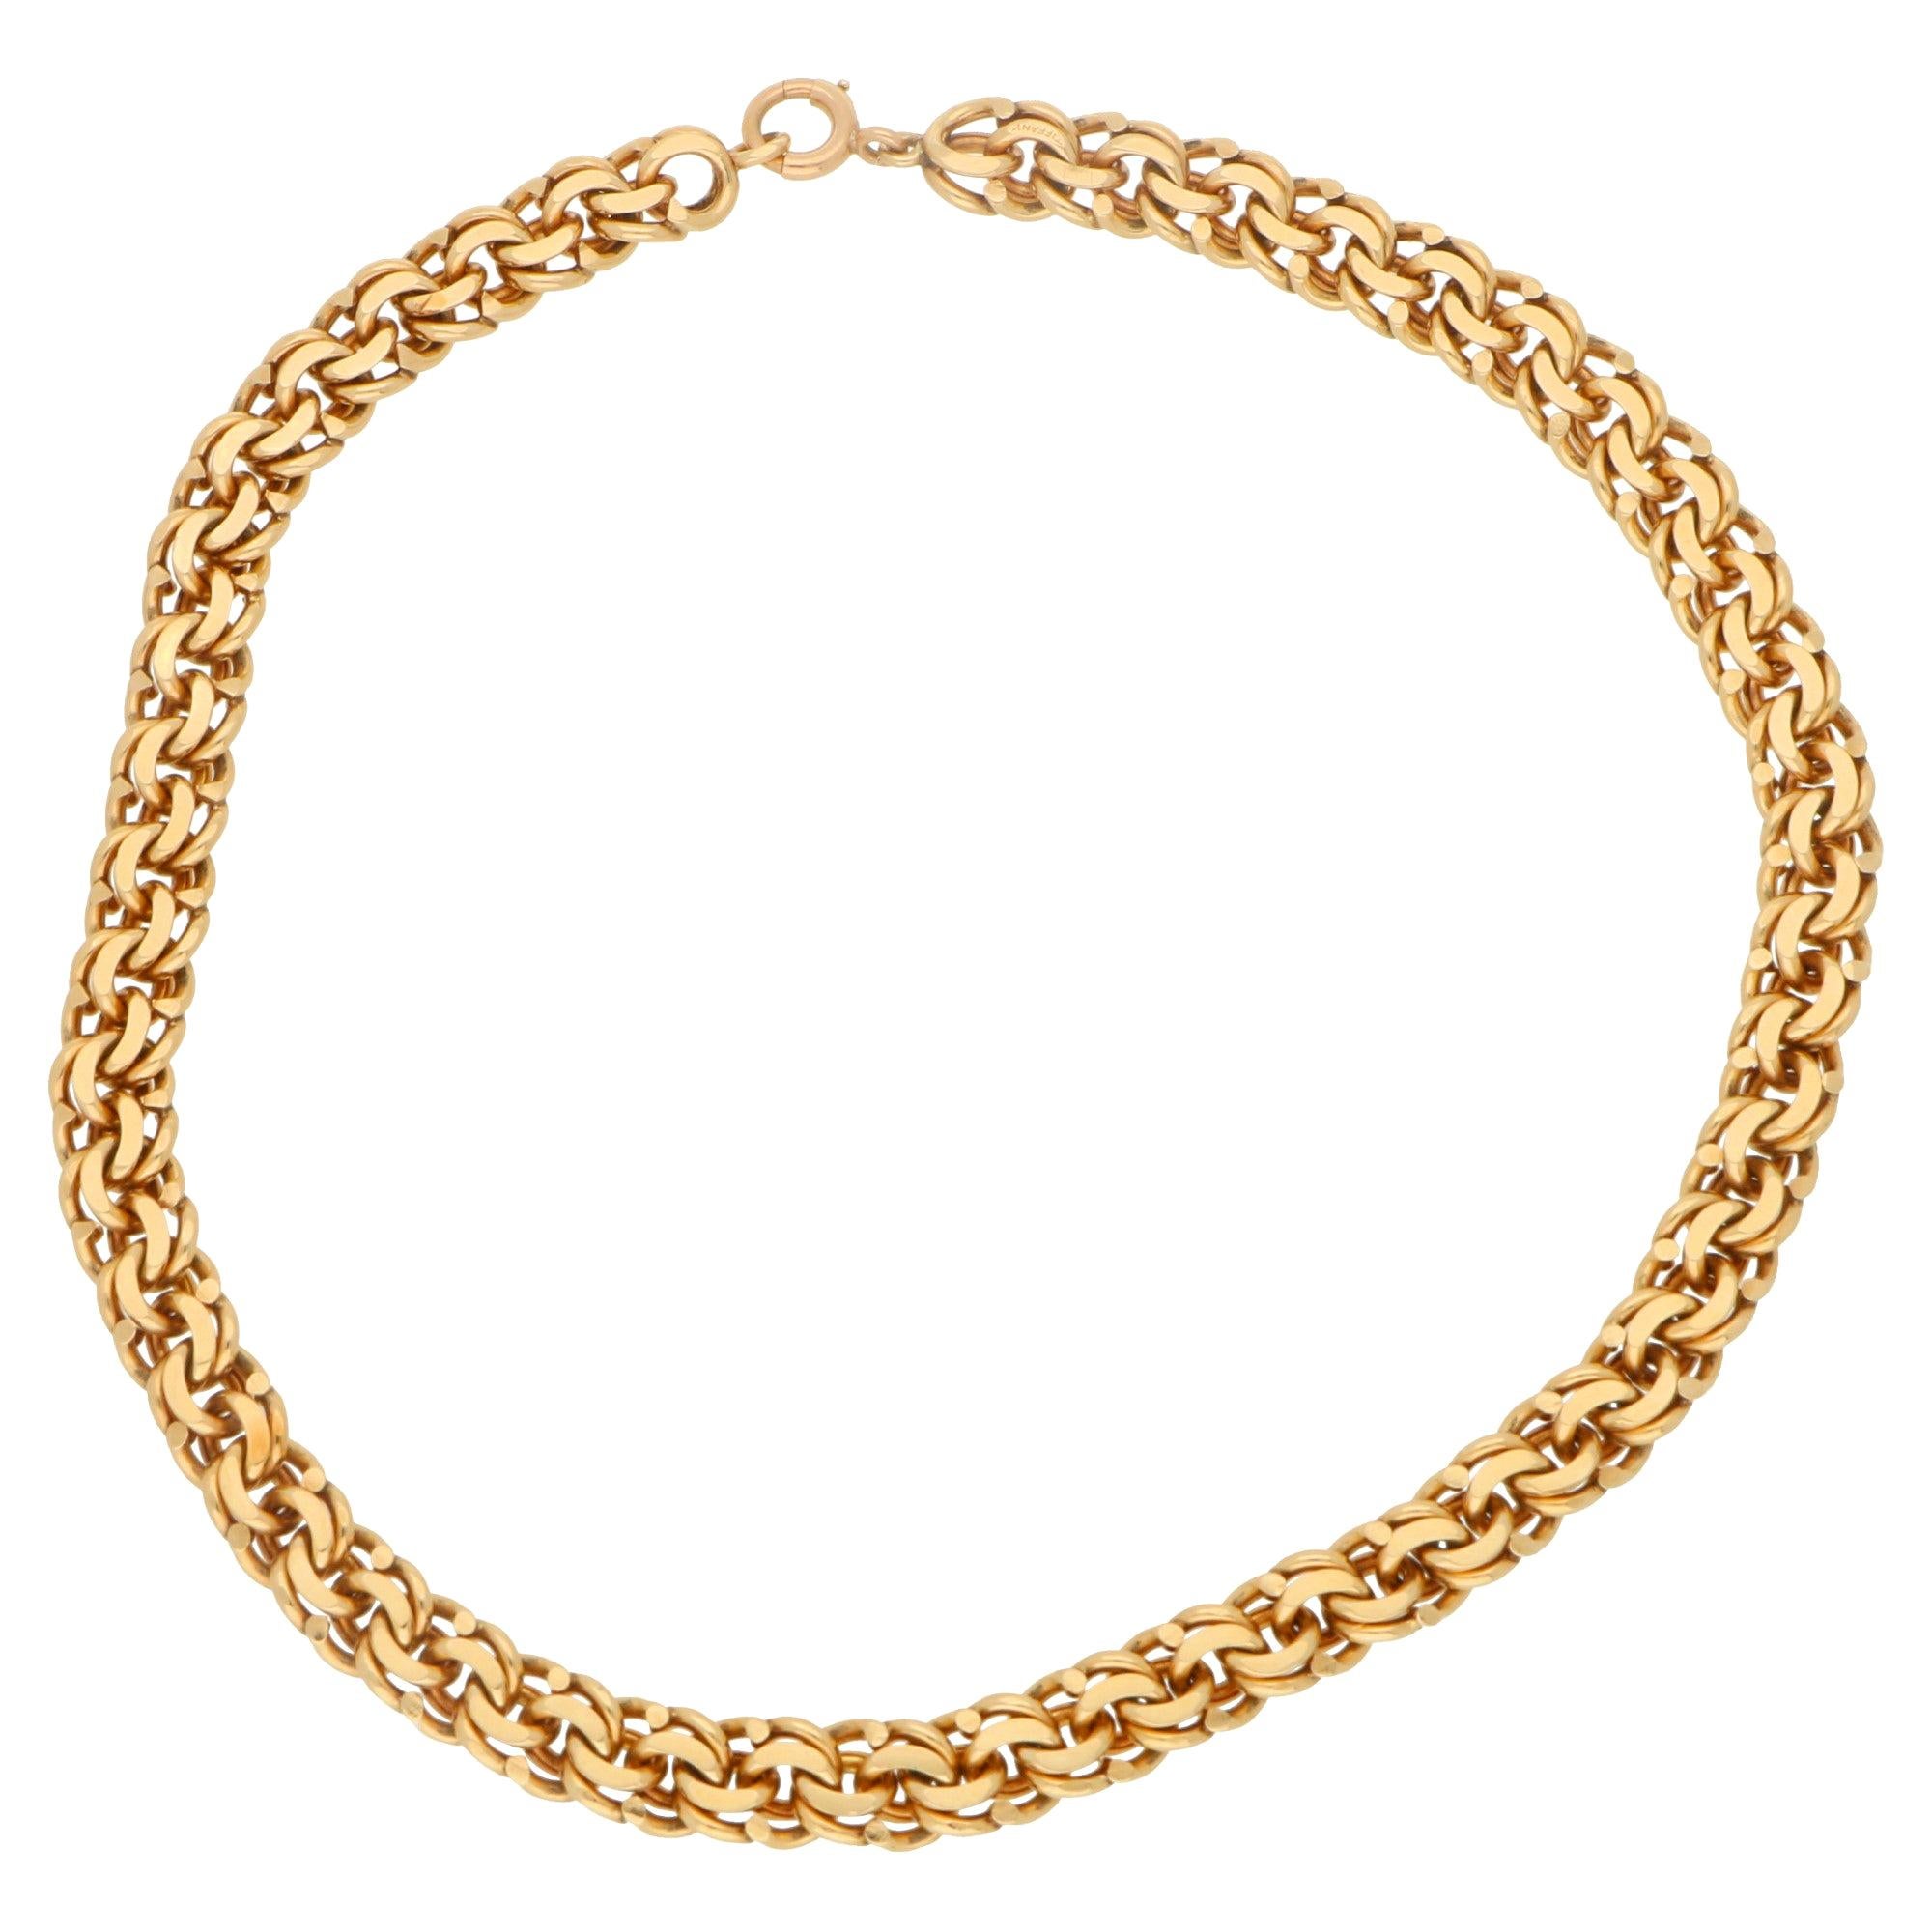 Tiffany & Co. Rope Chain Necklace in 14k Gold 